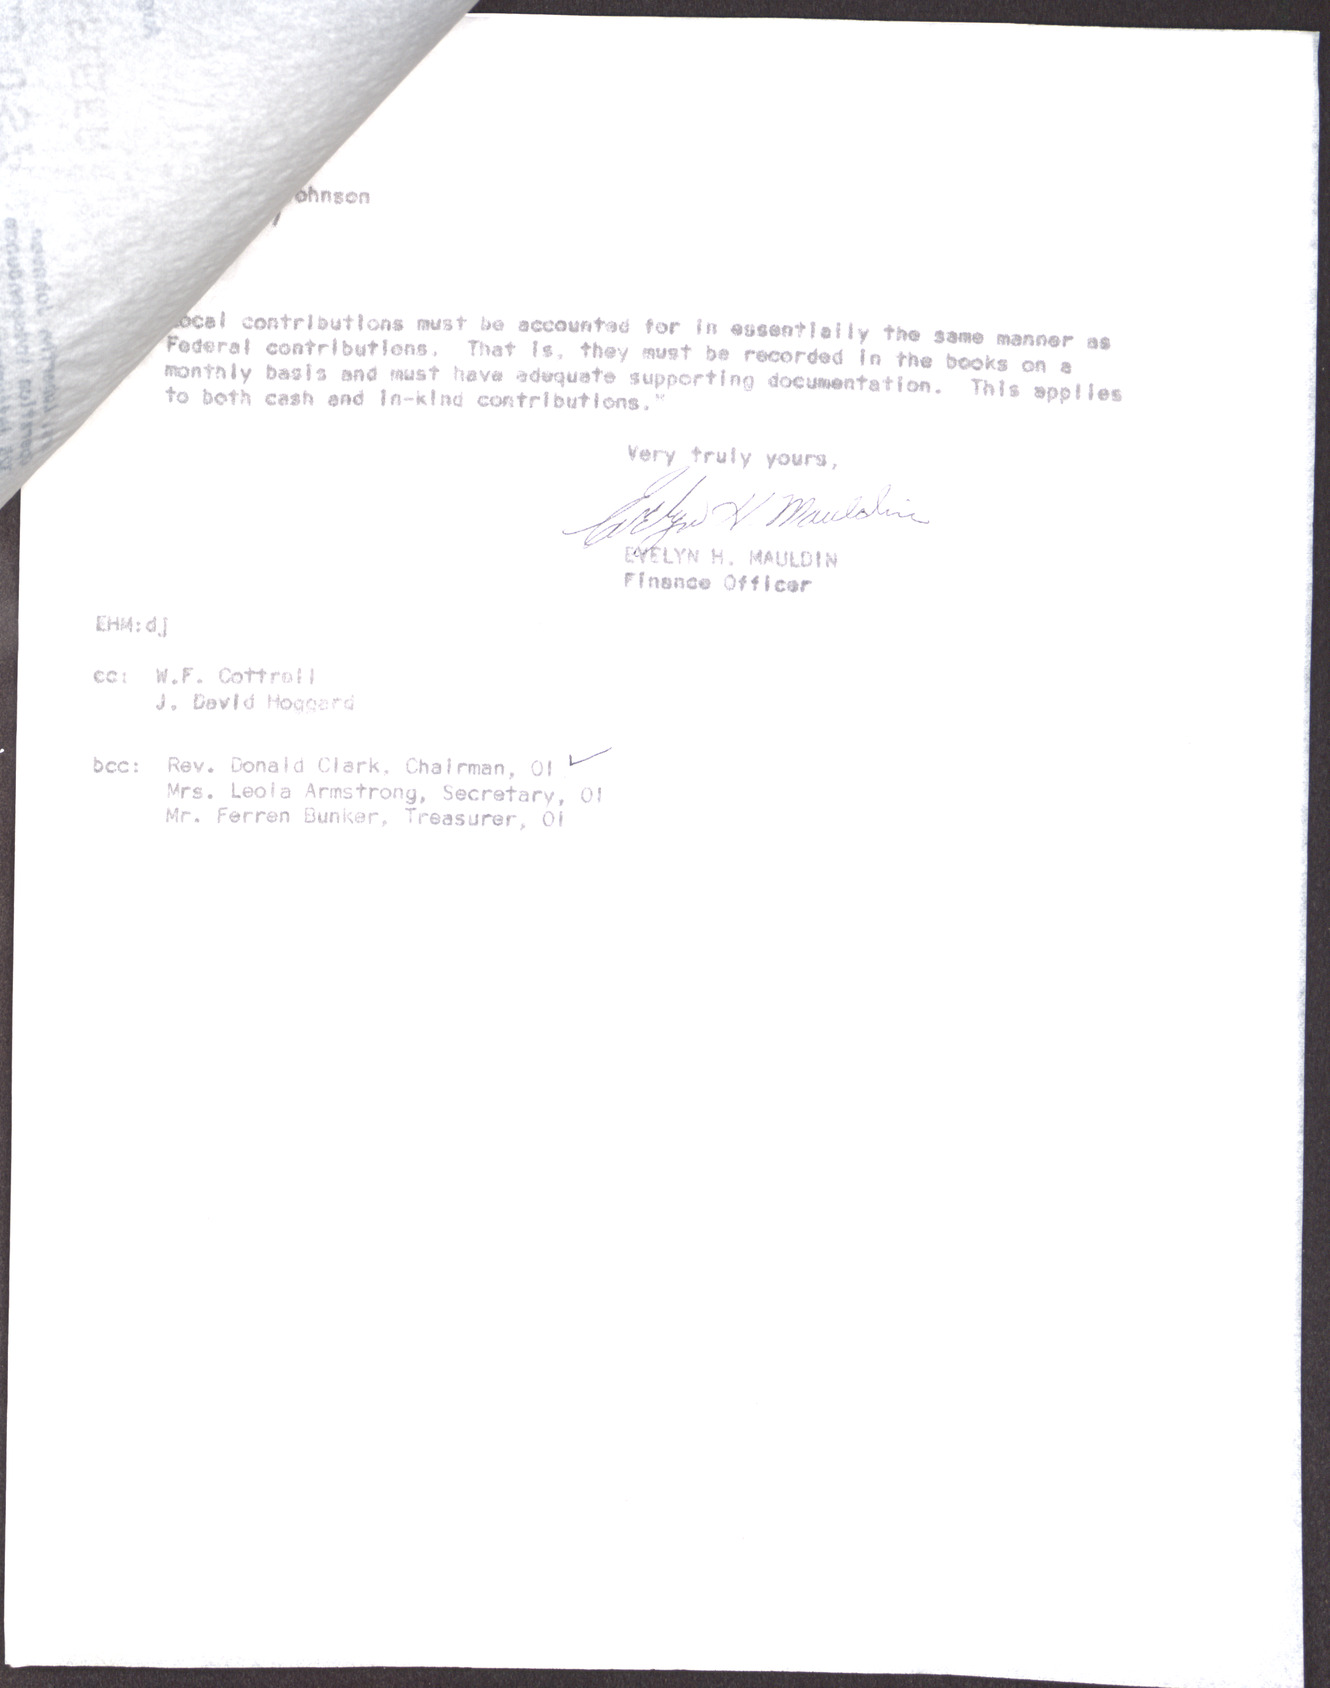 Letter to Mrs. Lubertha M. Johnson from Evelyn H. Maudlin (2 pages), August 1, 1967, page 2